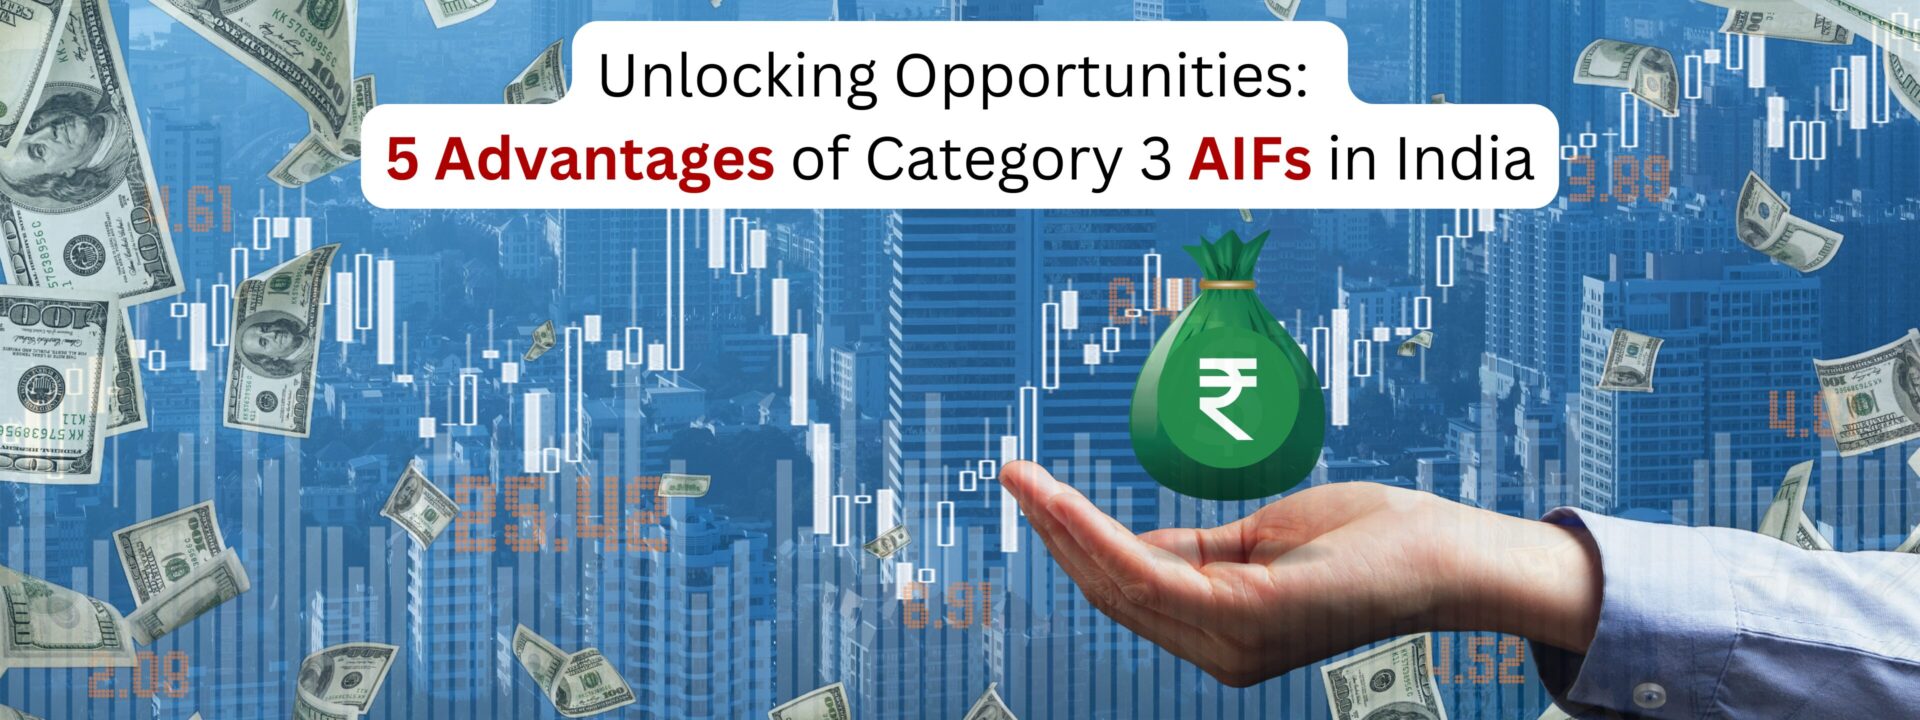 Unlocking Opportunities: 5 Advantages of Category 3 AIFs in India